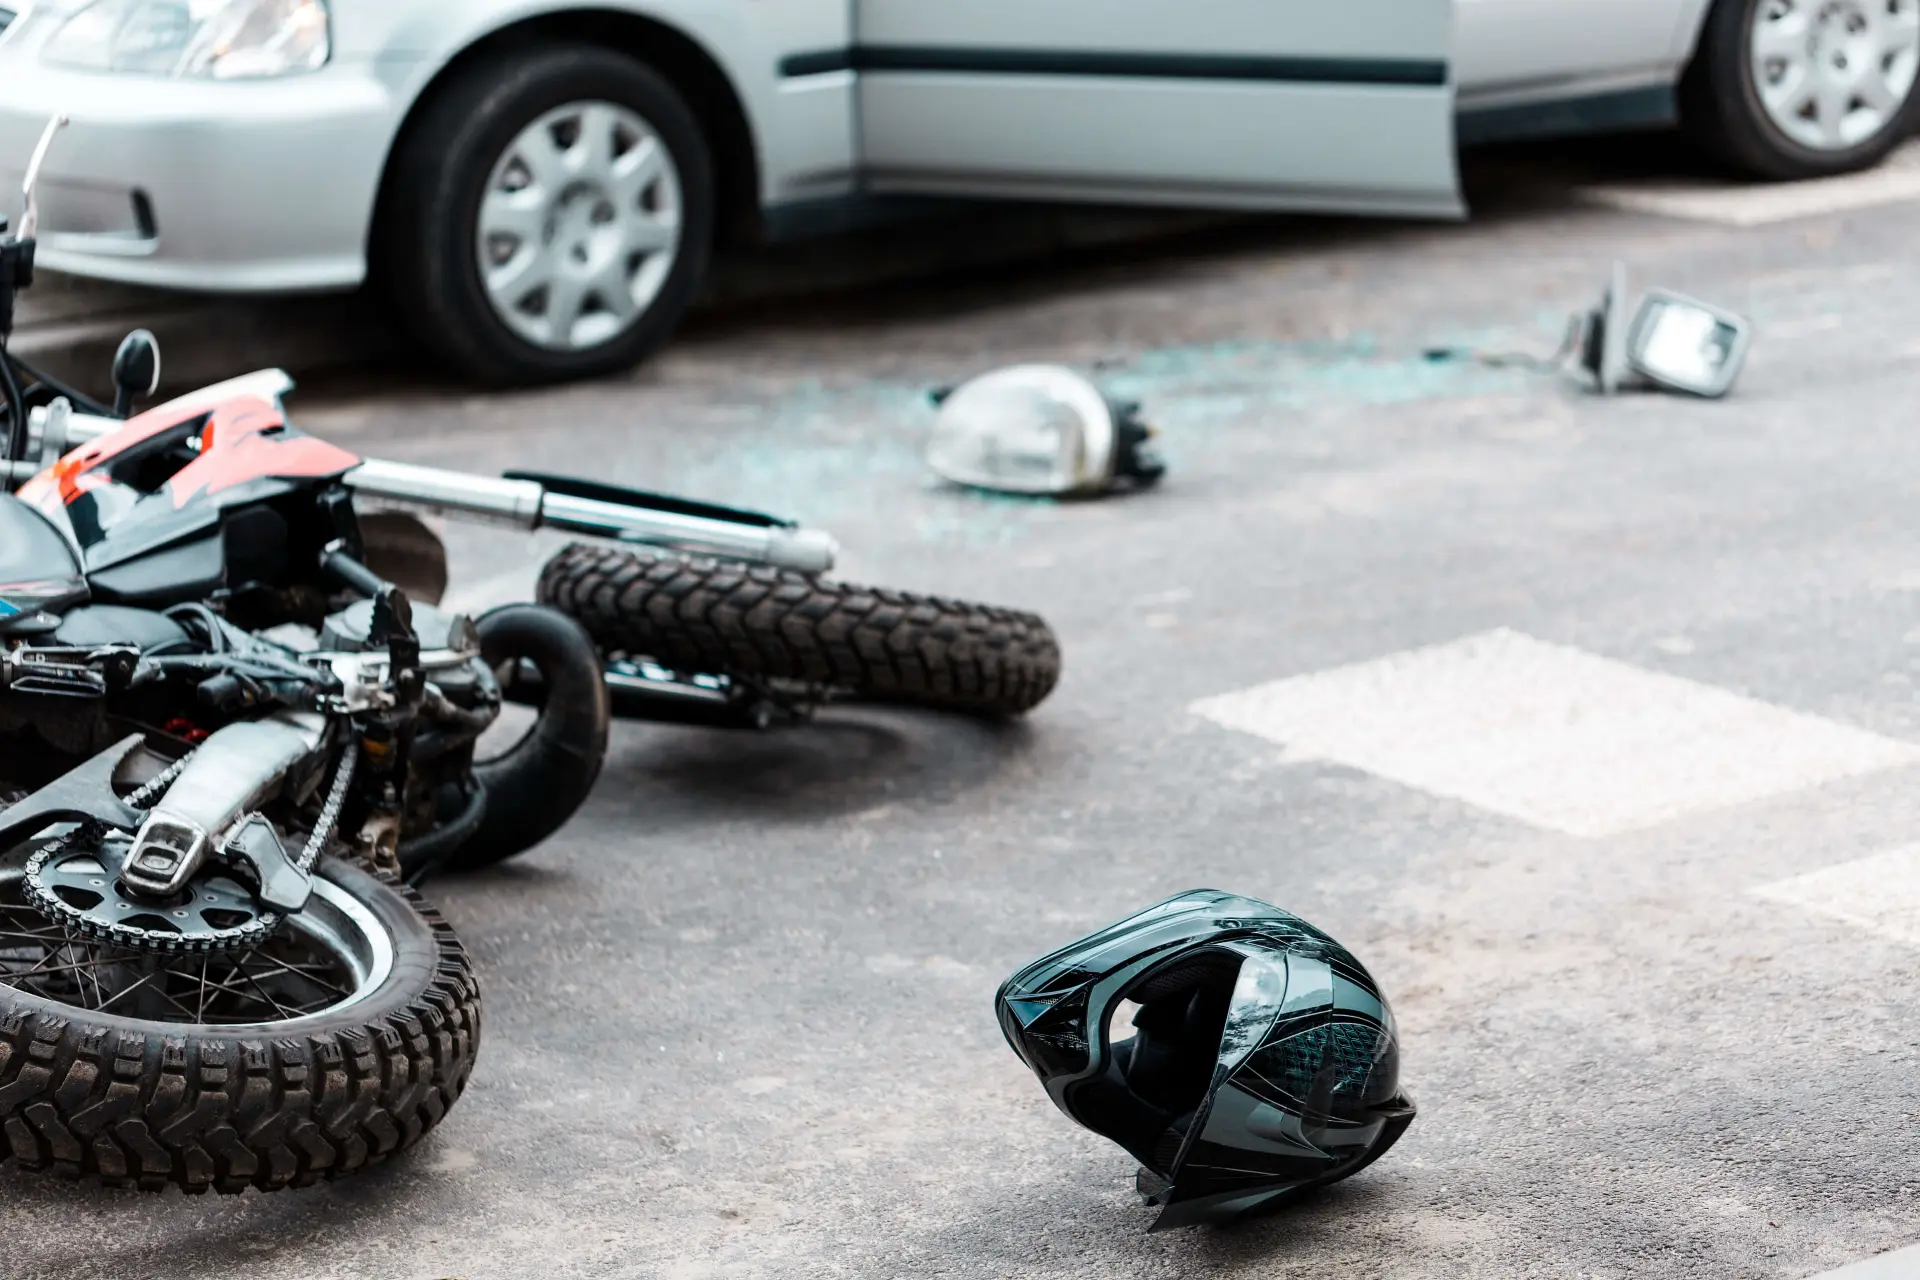 a motorcycle helmet and broken car parts are strewn across a street in the aftermath of a motorcycle colliding with a car